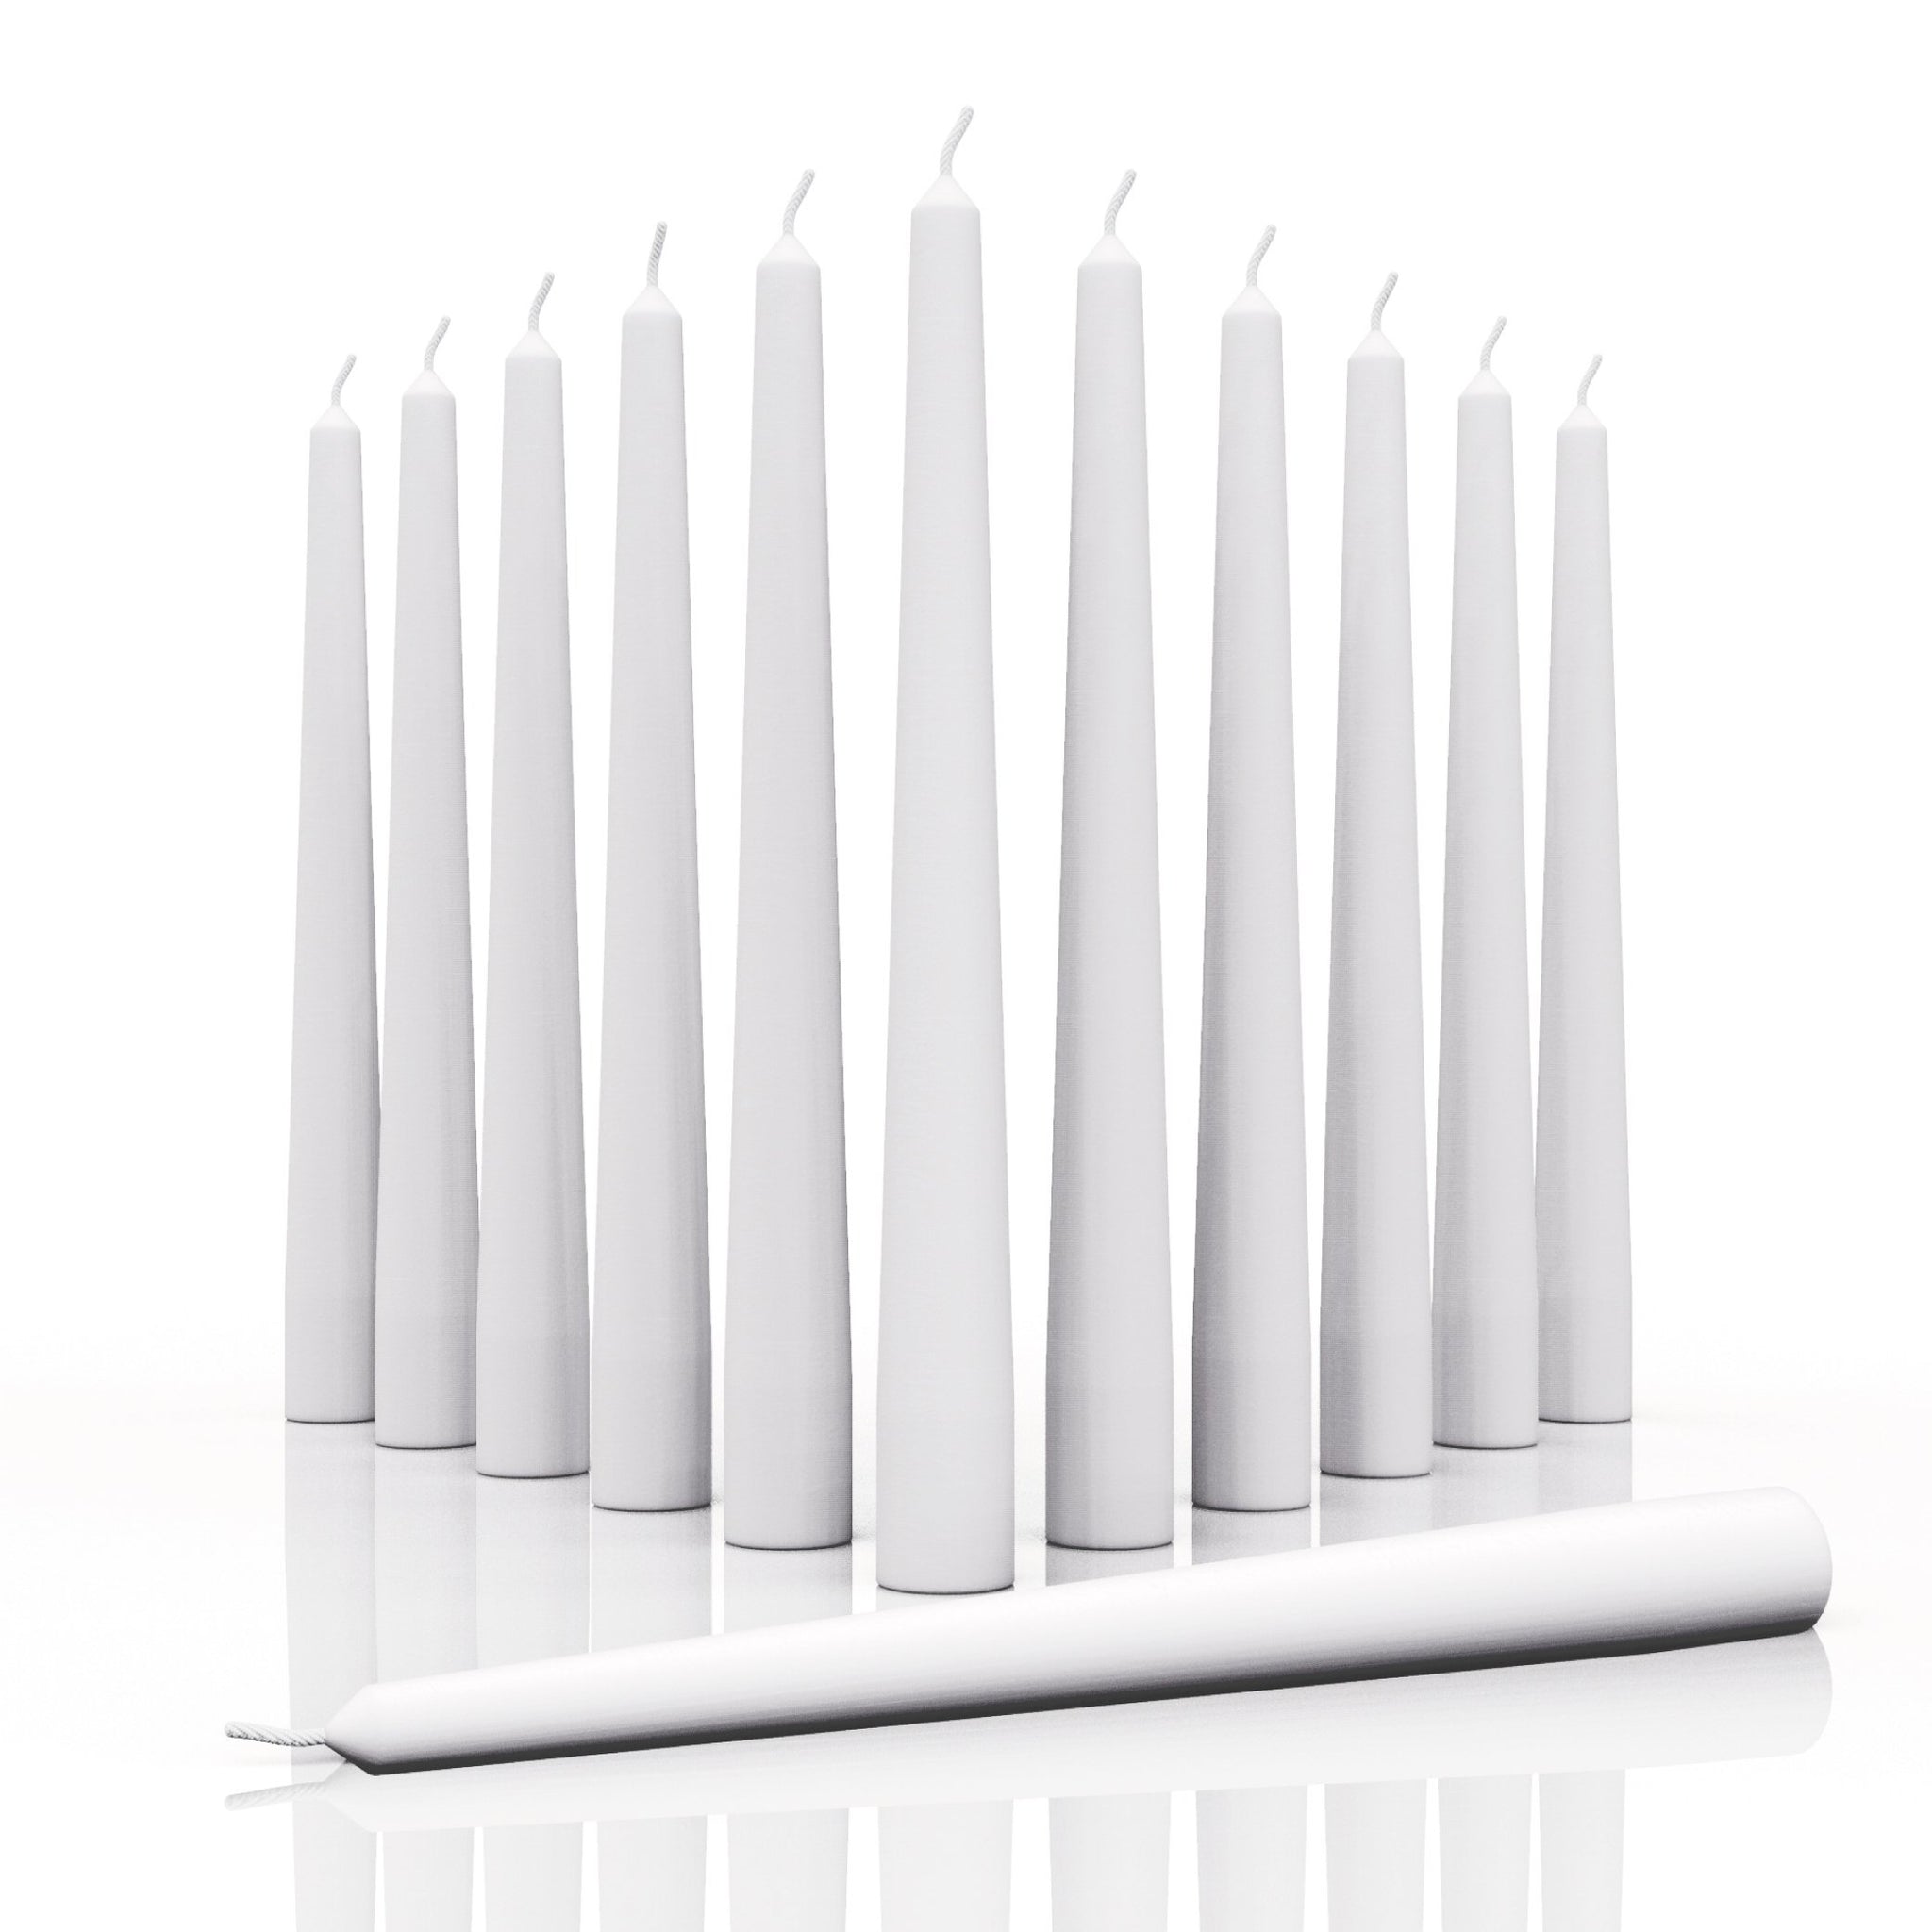 CANDWAX White Taper Candles - BIG SET